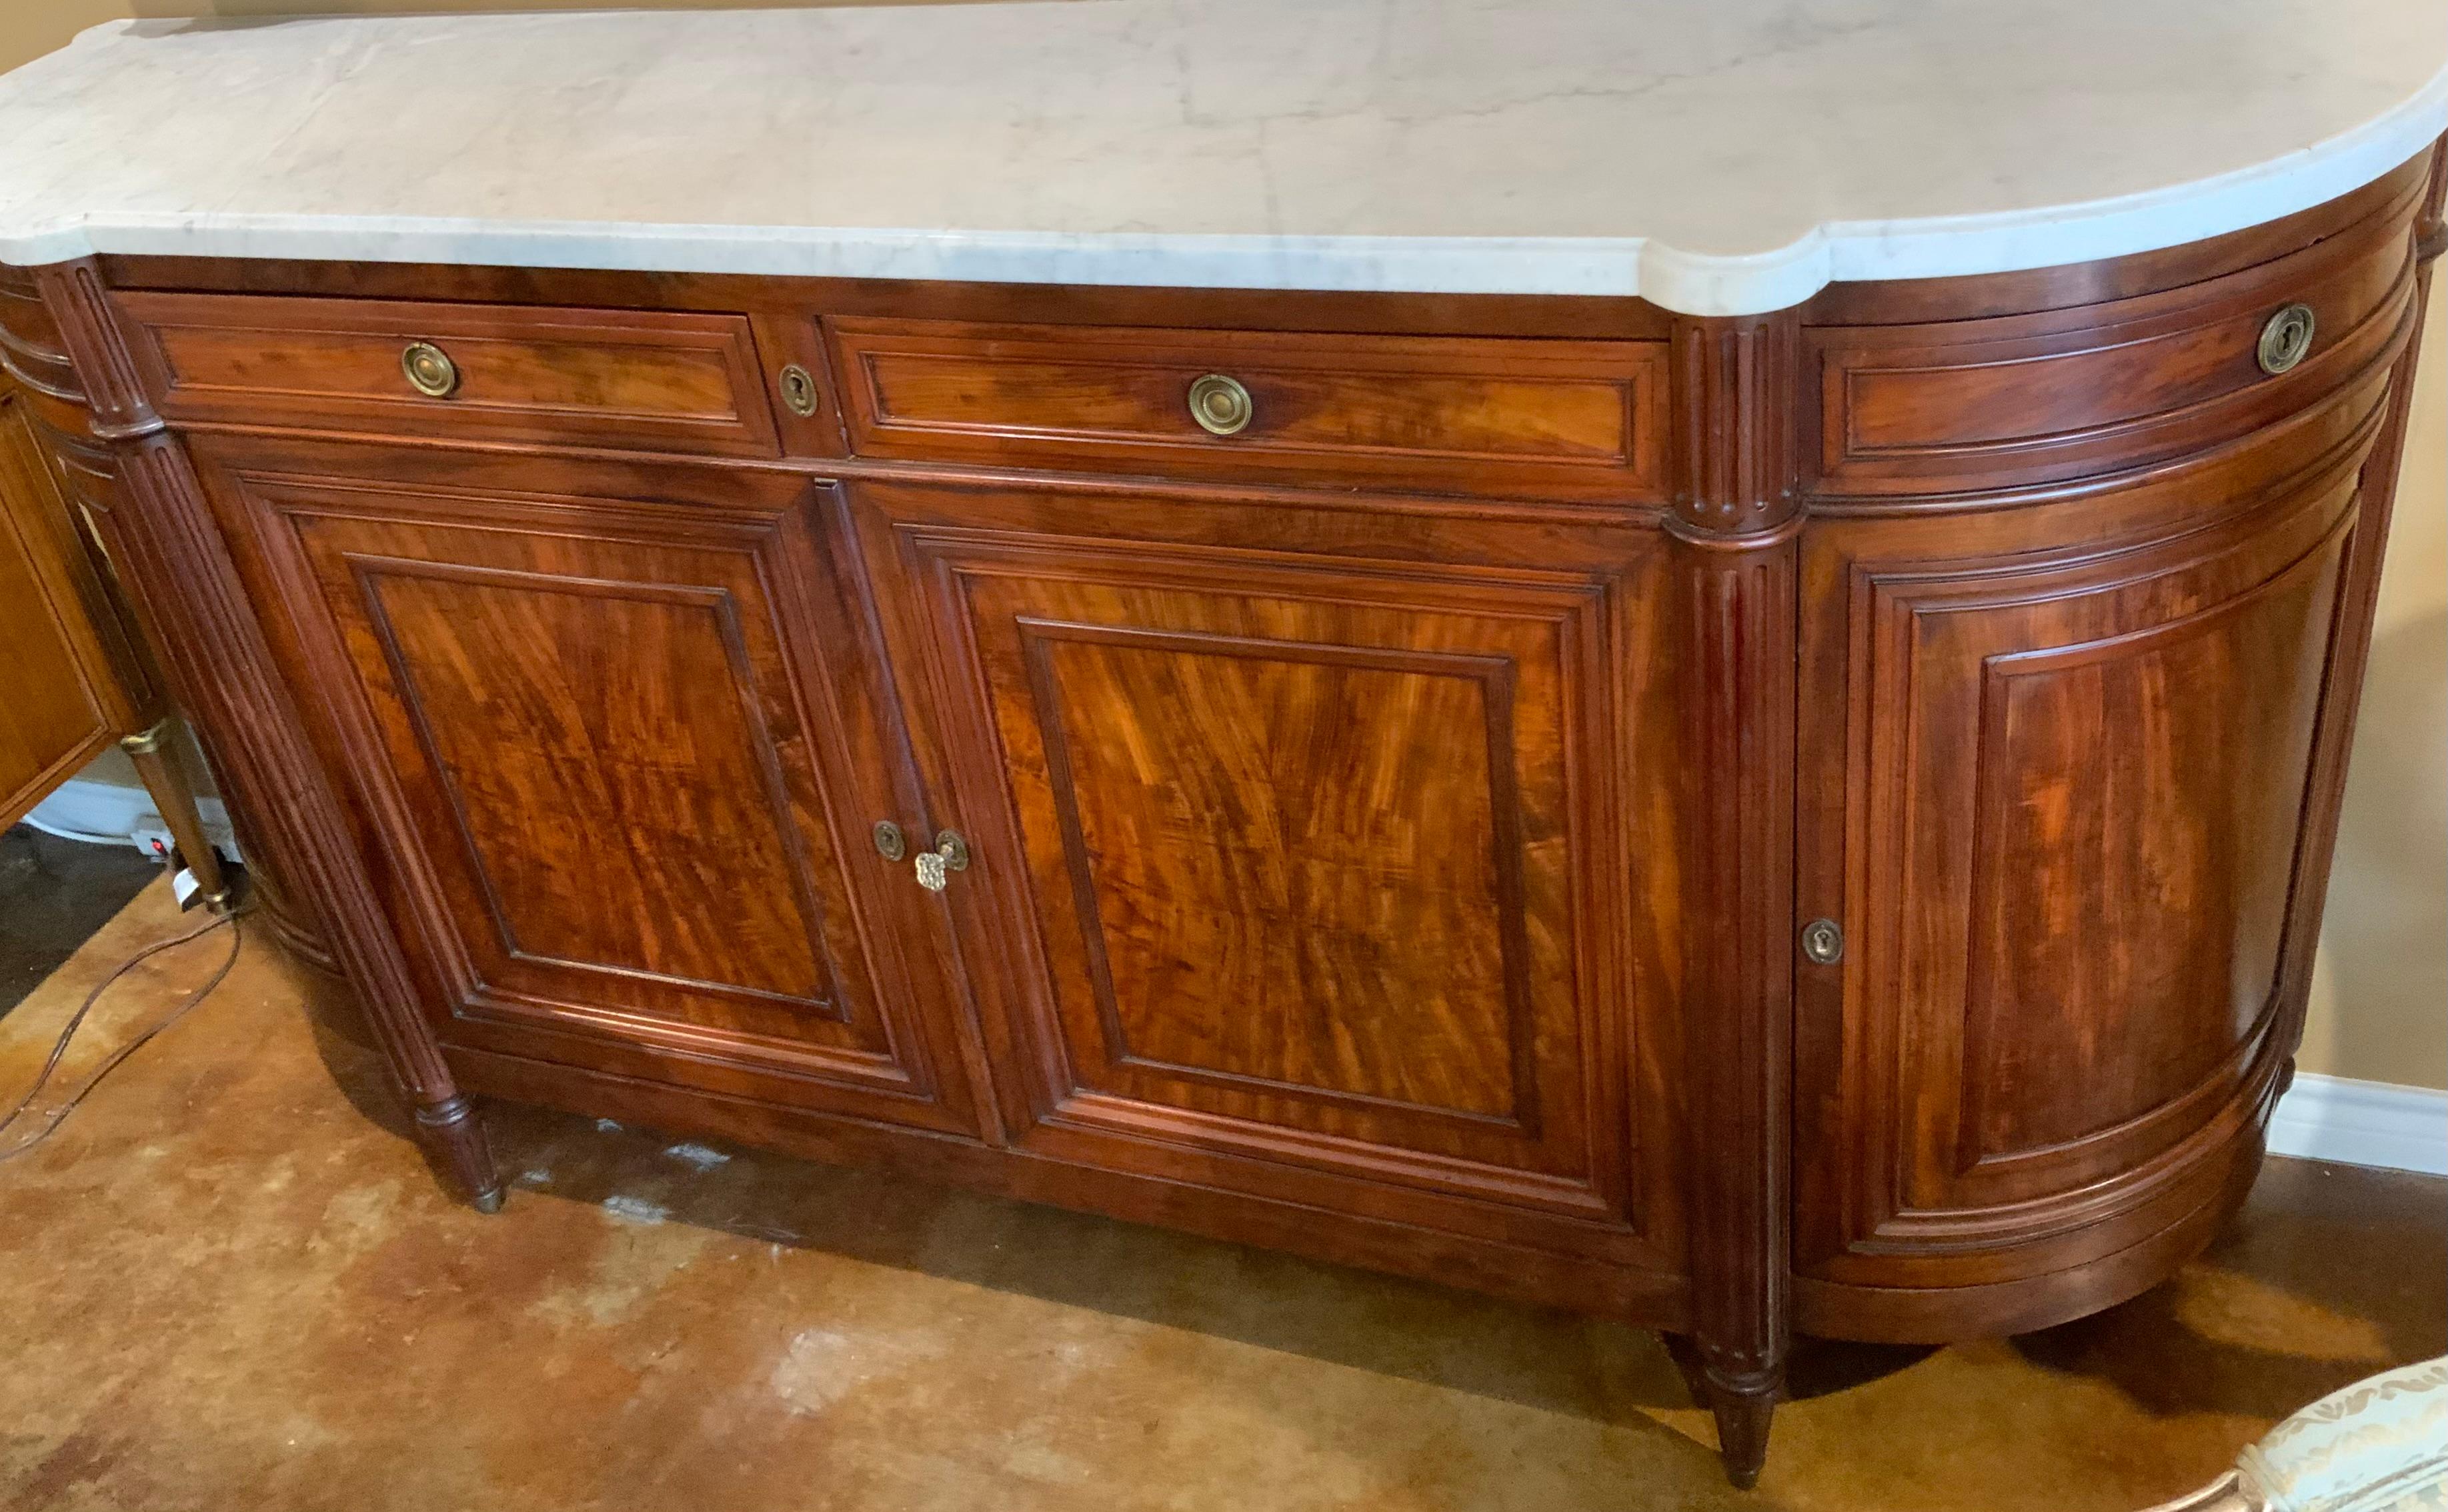 Fine mahogany wood has been used in construction of this piece.
A white marble top with very light gray veining is on top and has
No breaks or restorations. It has graceful curved sides. All doors and
Drawers open and slide easily. It has a key and